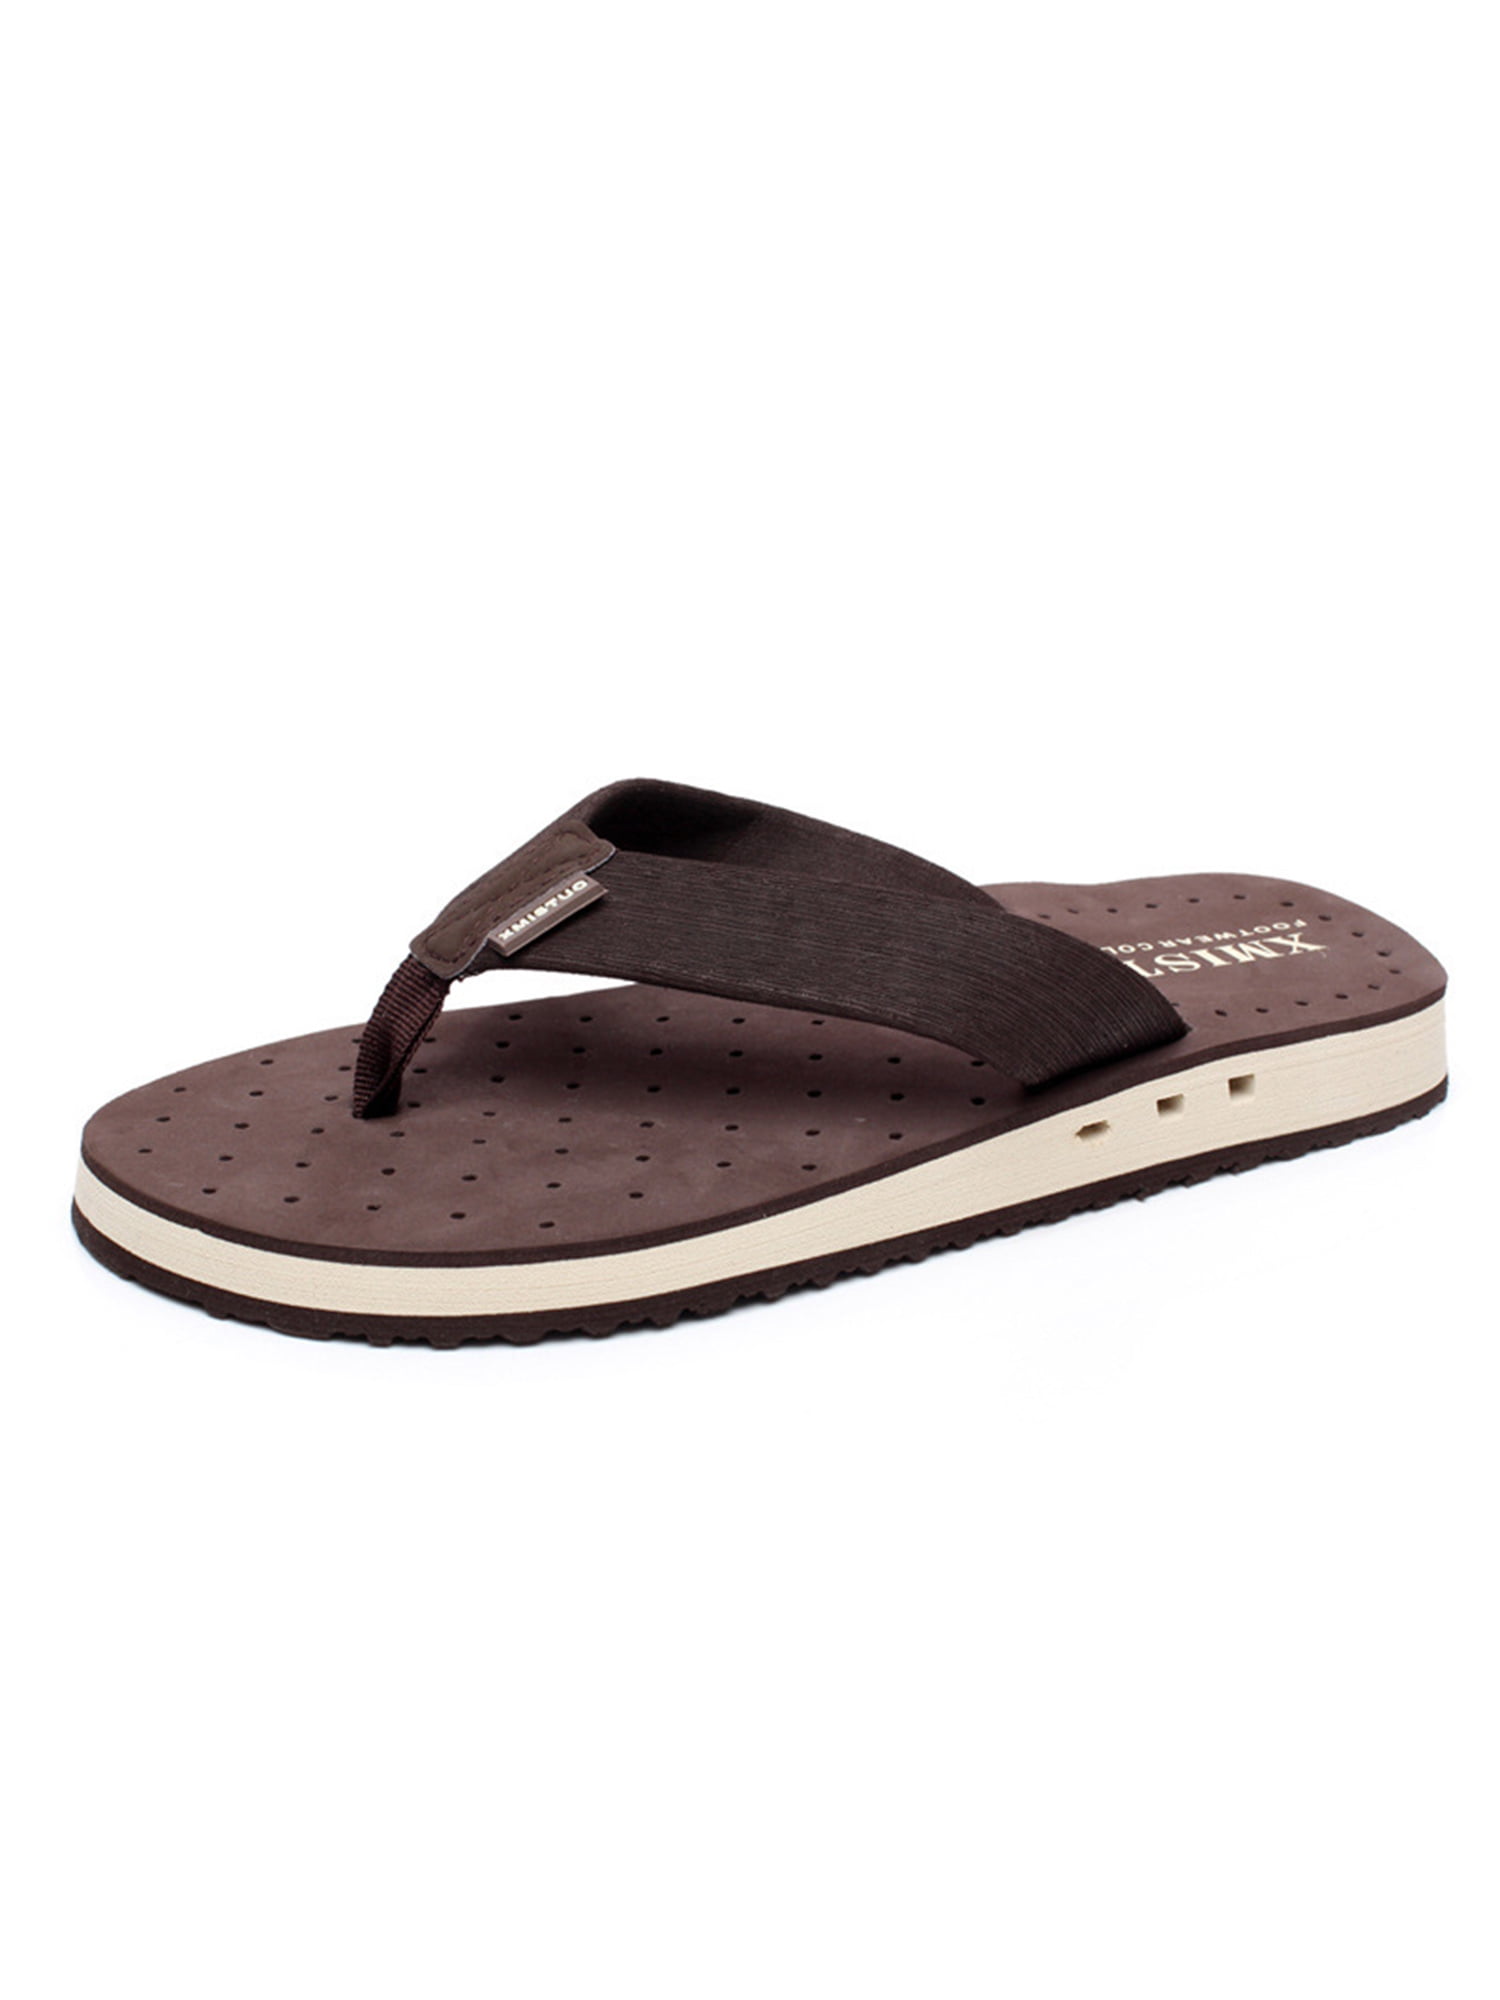 Men's Faux Leather Slipper Flat Chappal Thong Sandal For Daily